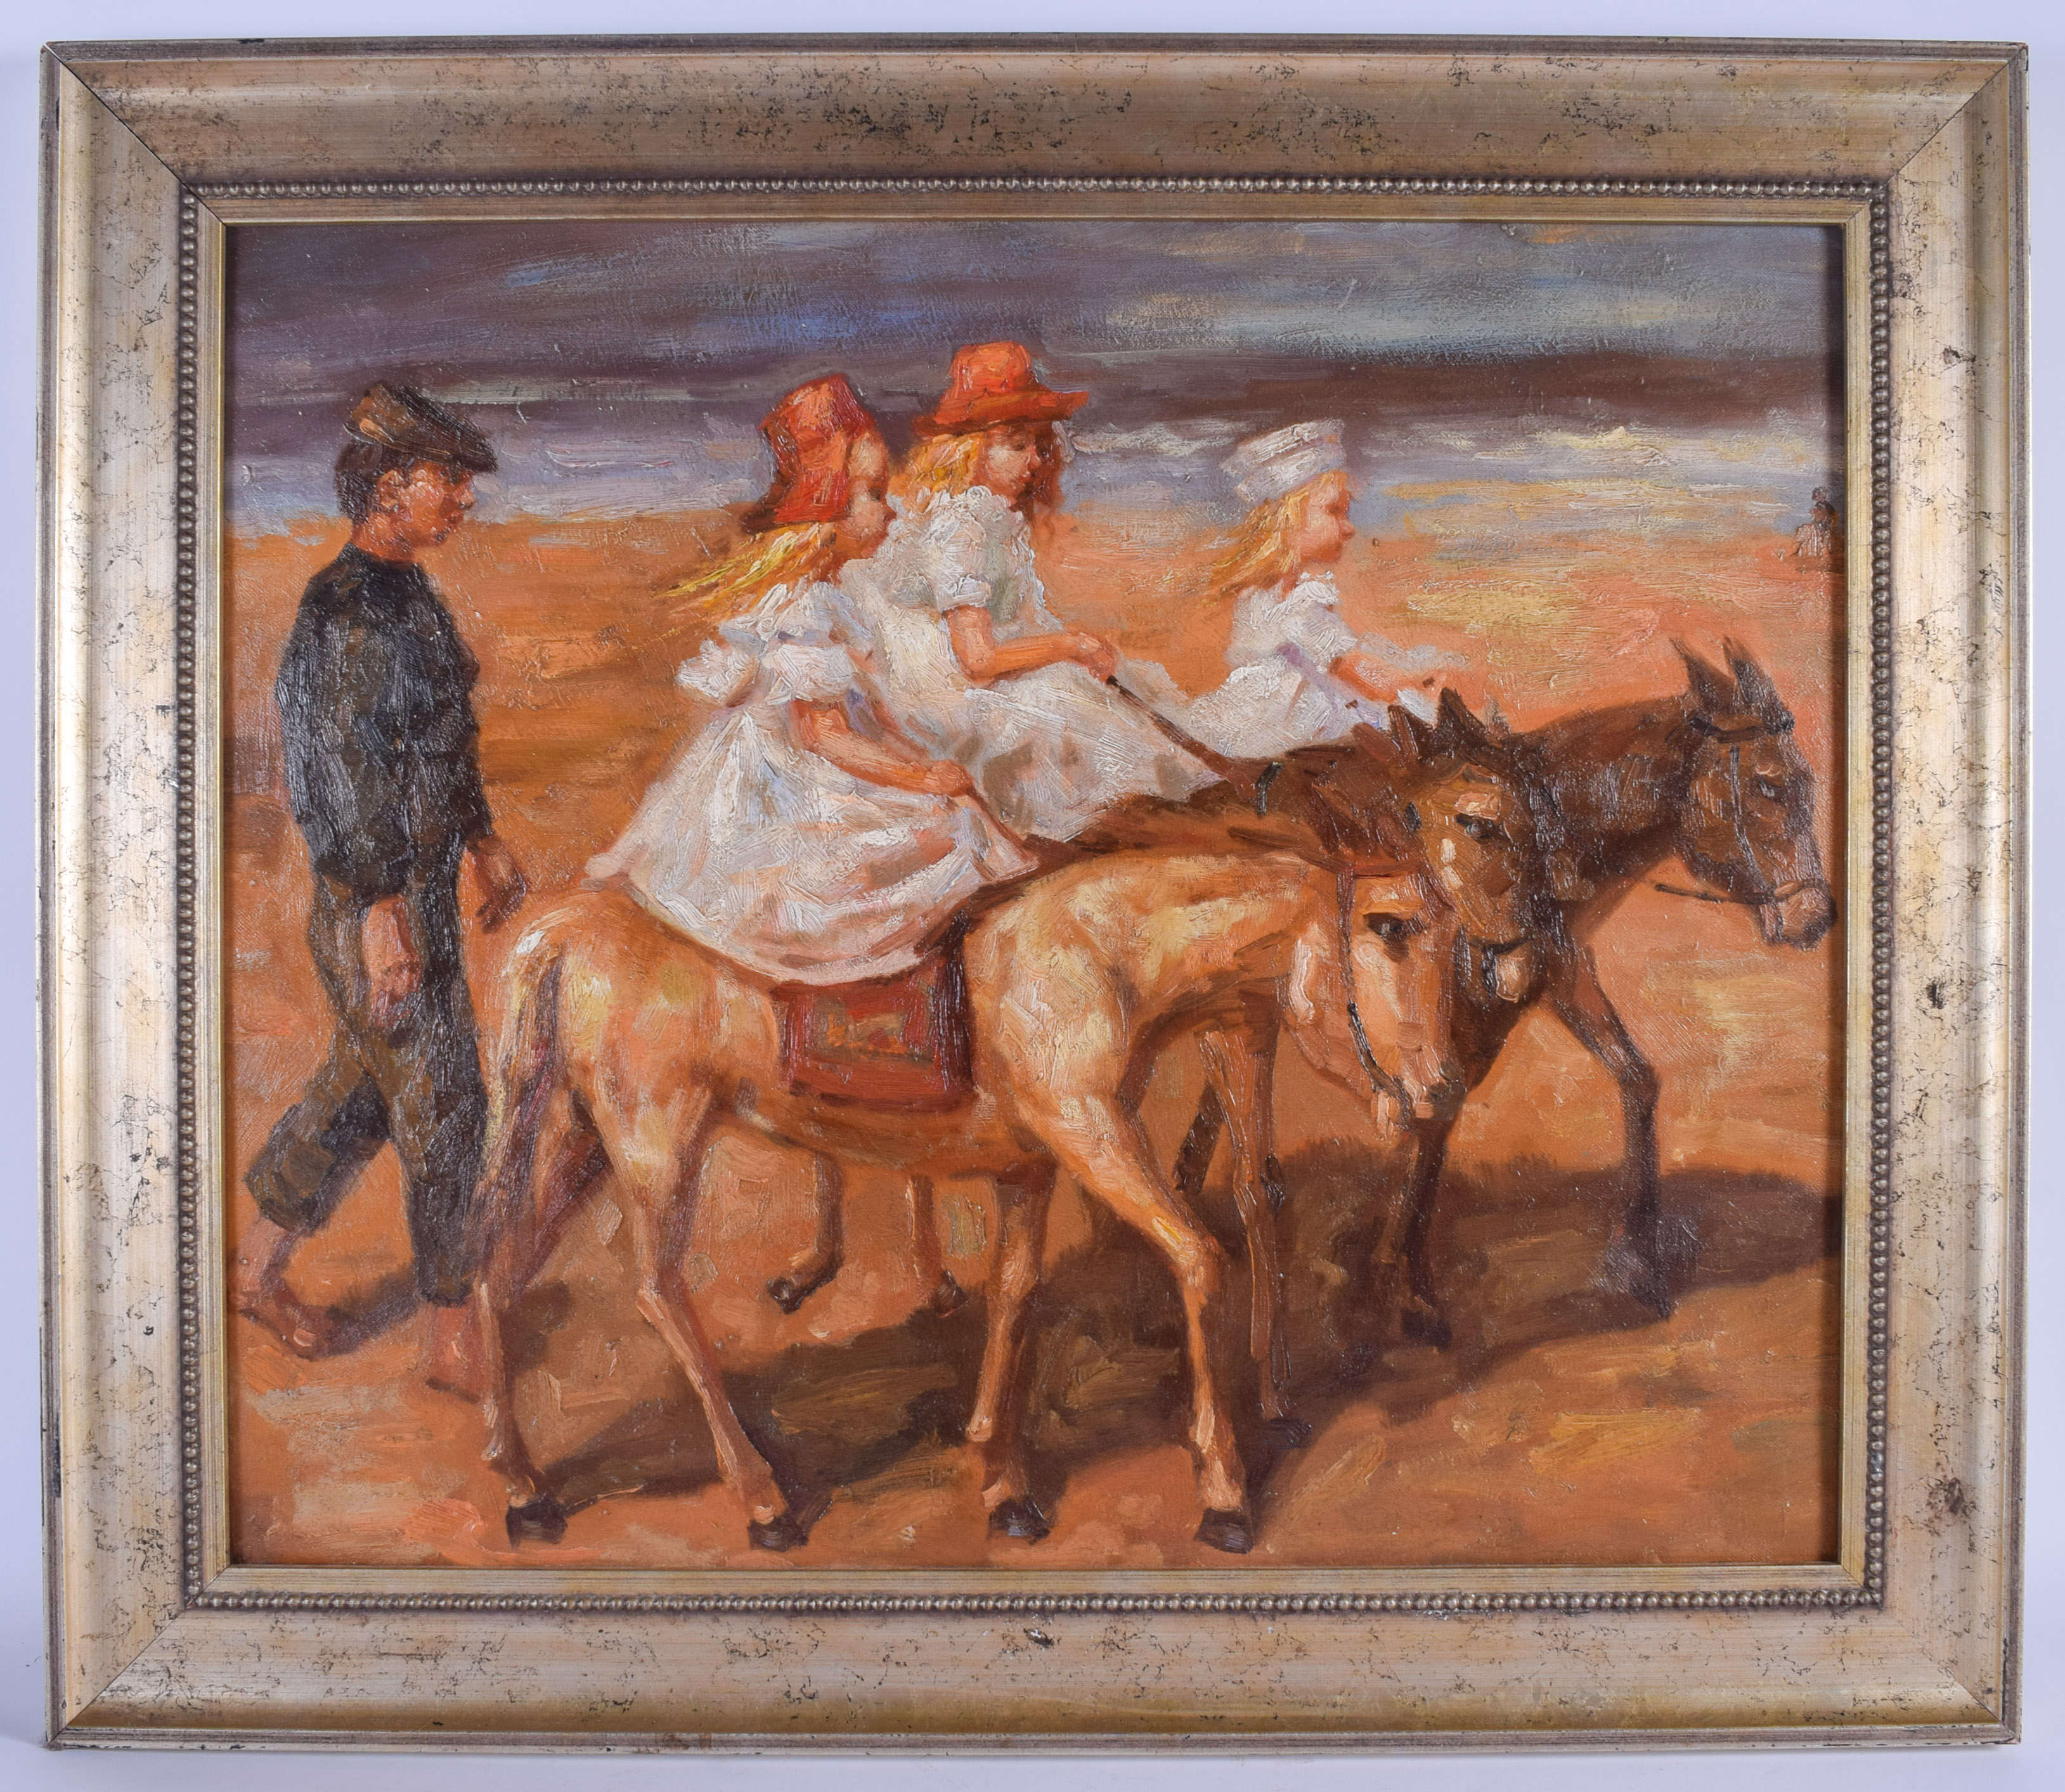 A CONTINENTAL OIL ON CANVAS Donkey rides at the beach. Image 60 cm x 47 cm.